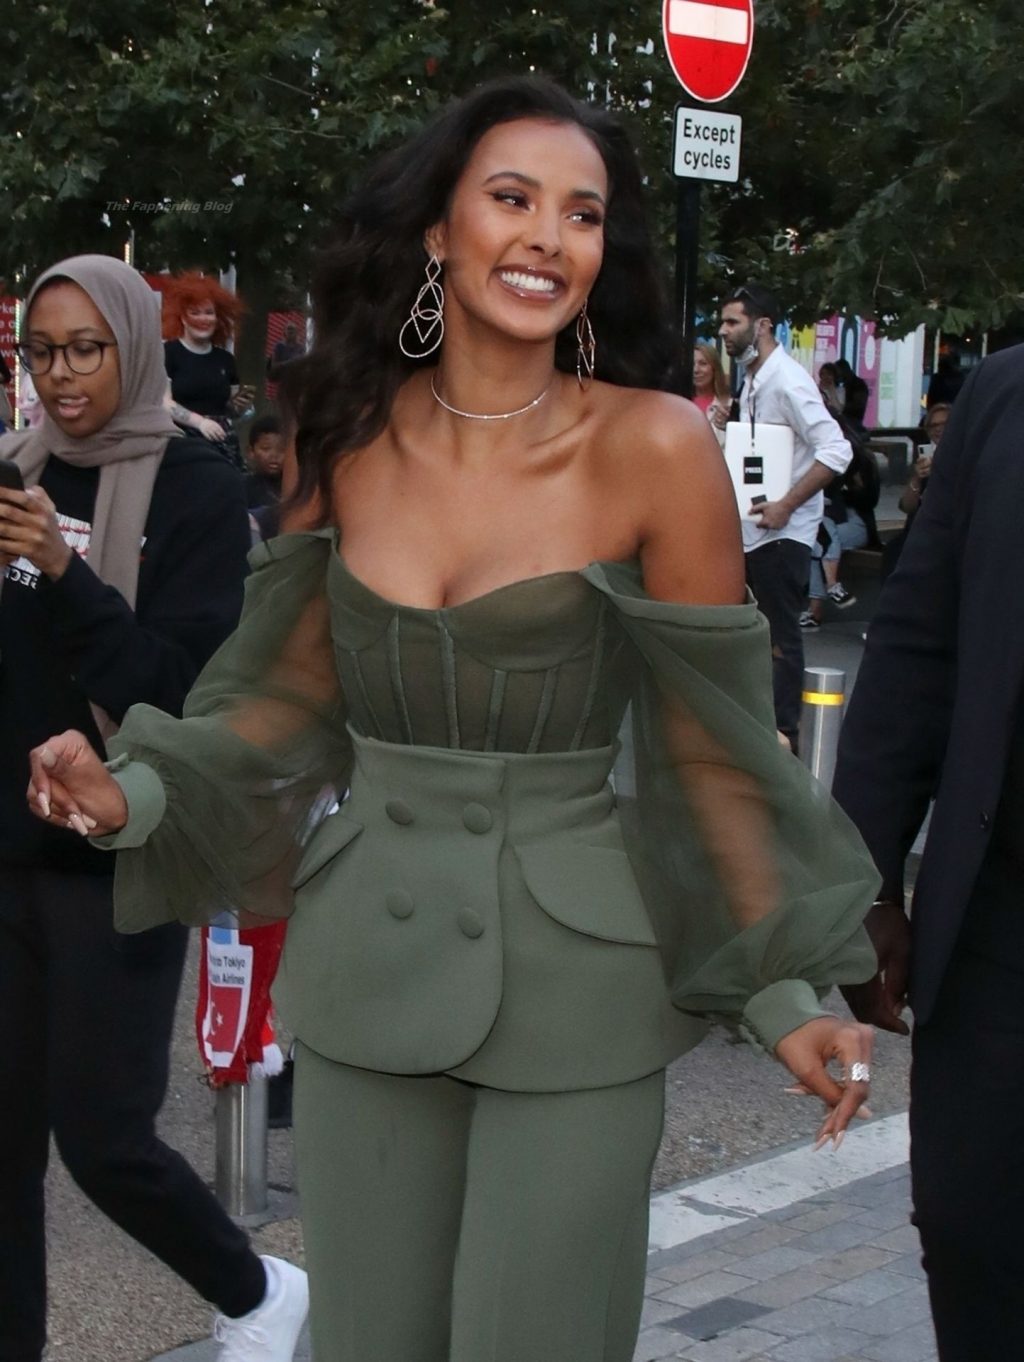 Maya Jama Arrives at the Sports DAZN X Matchroom Event in London (75 Photos)